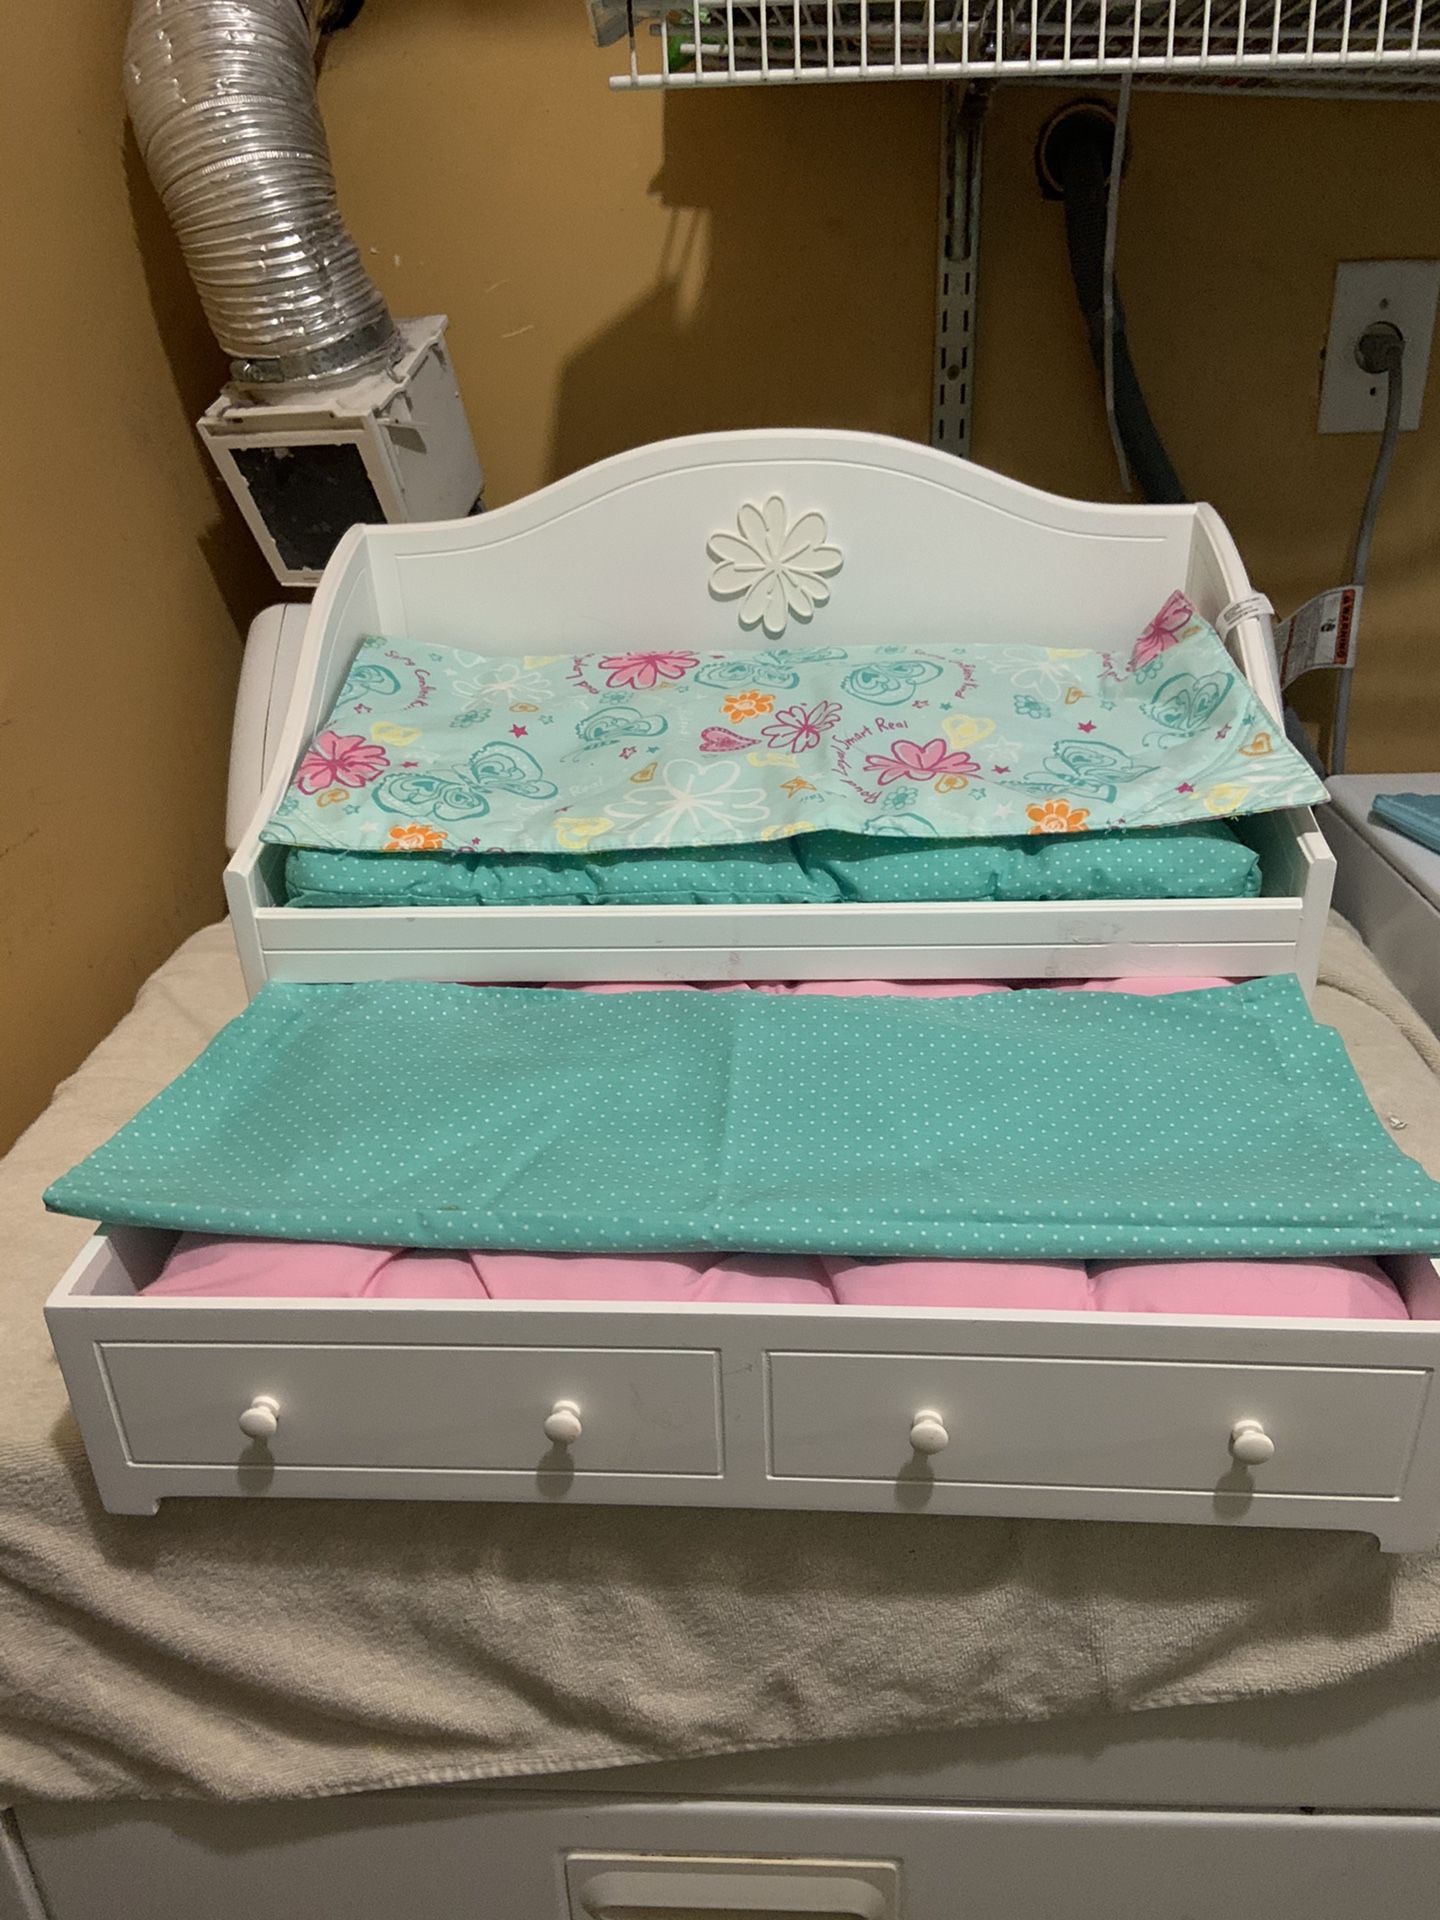 American girl trundle bed for 18” doll